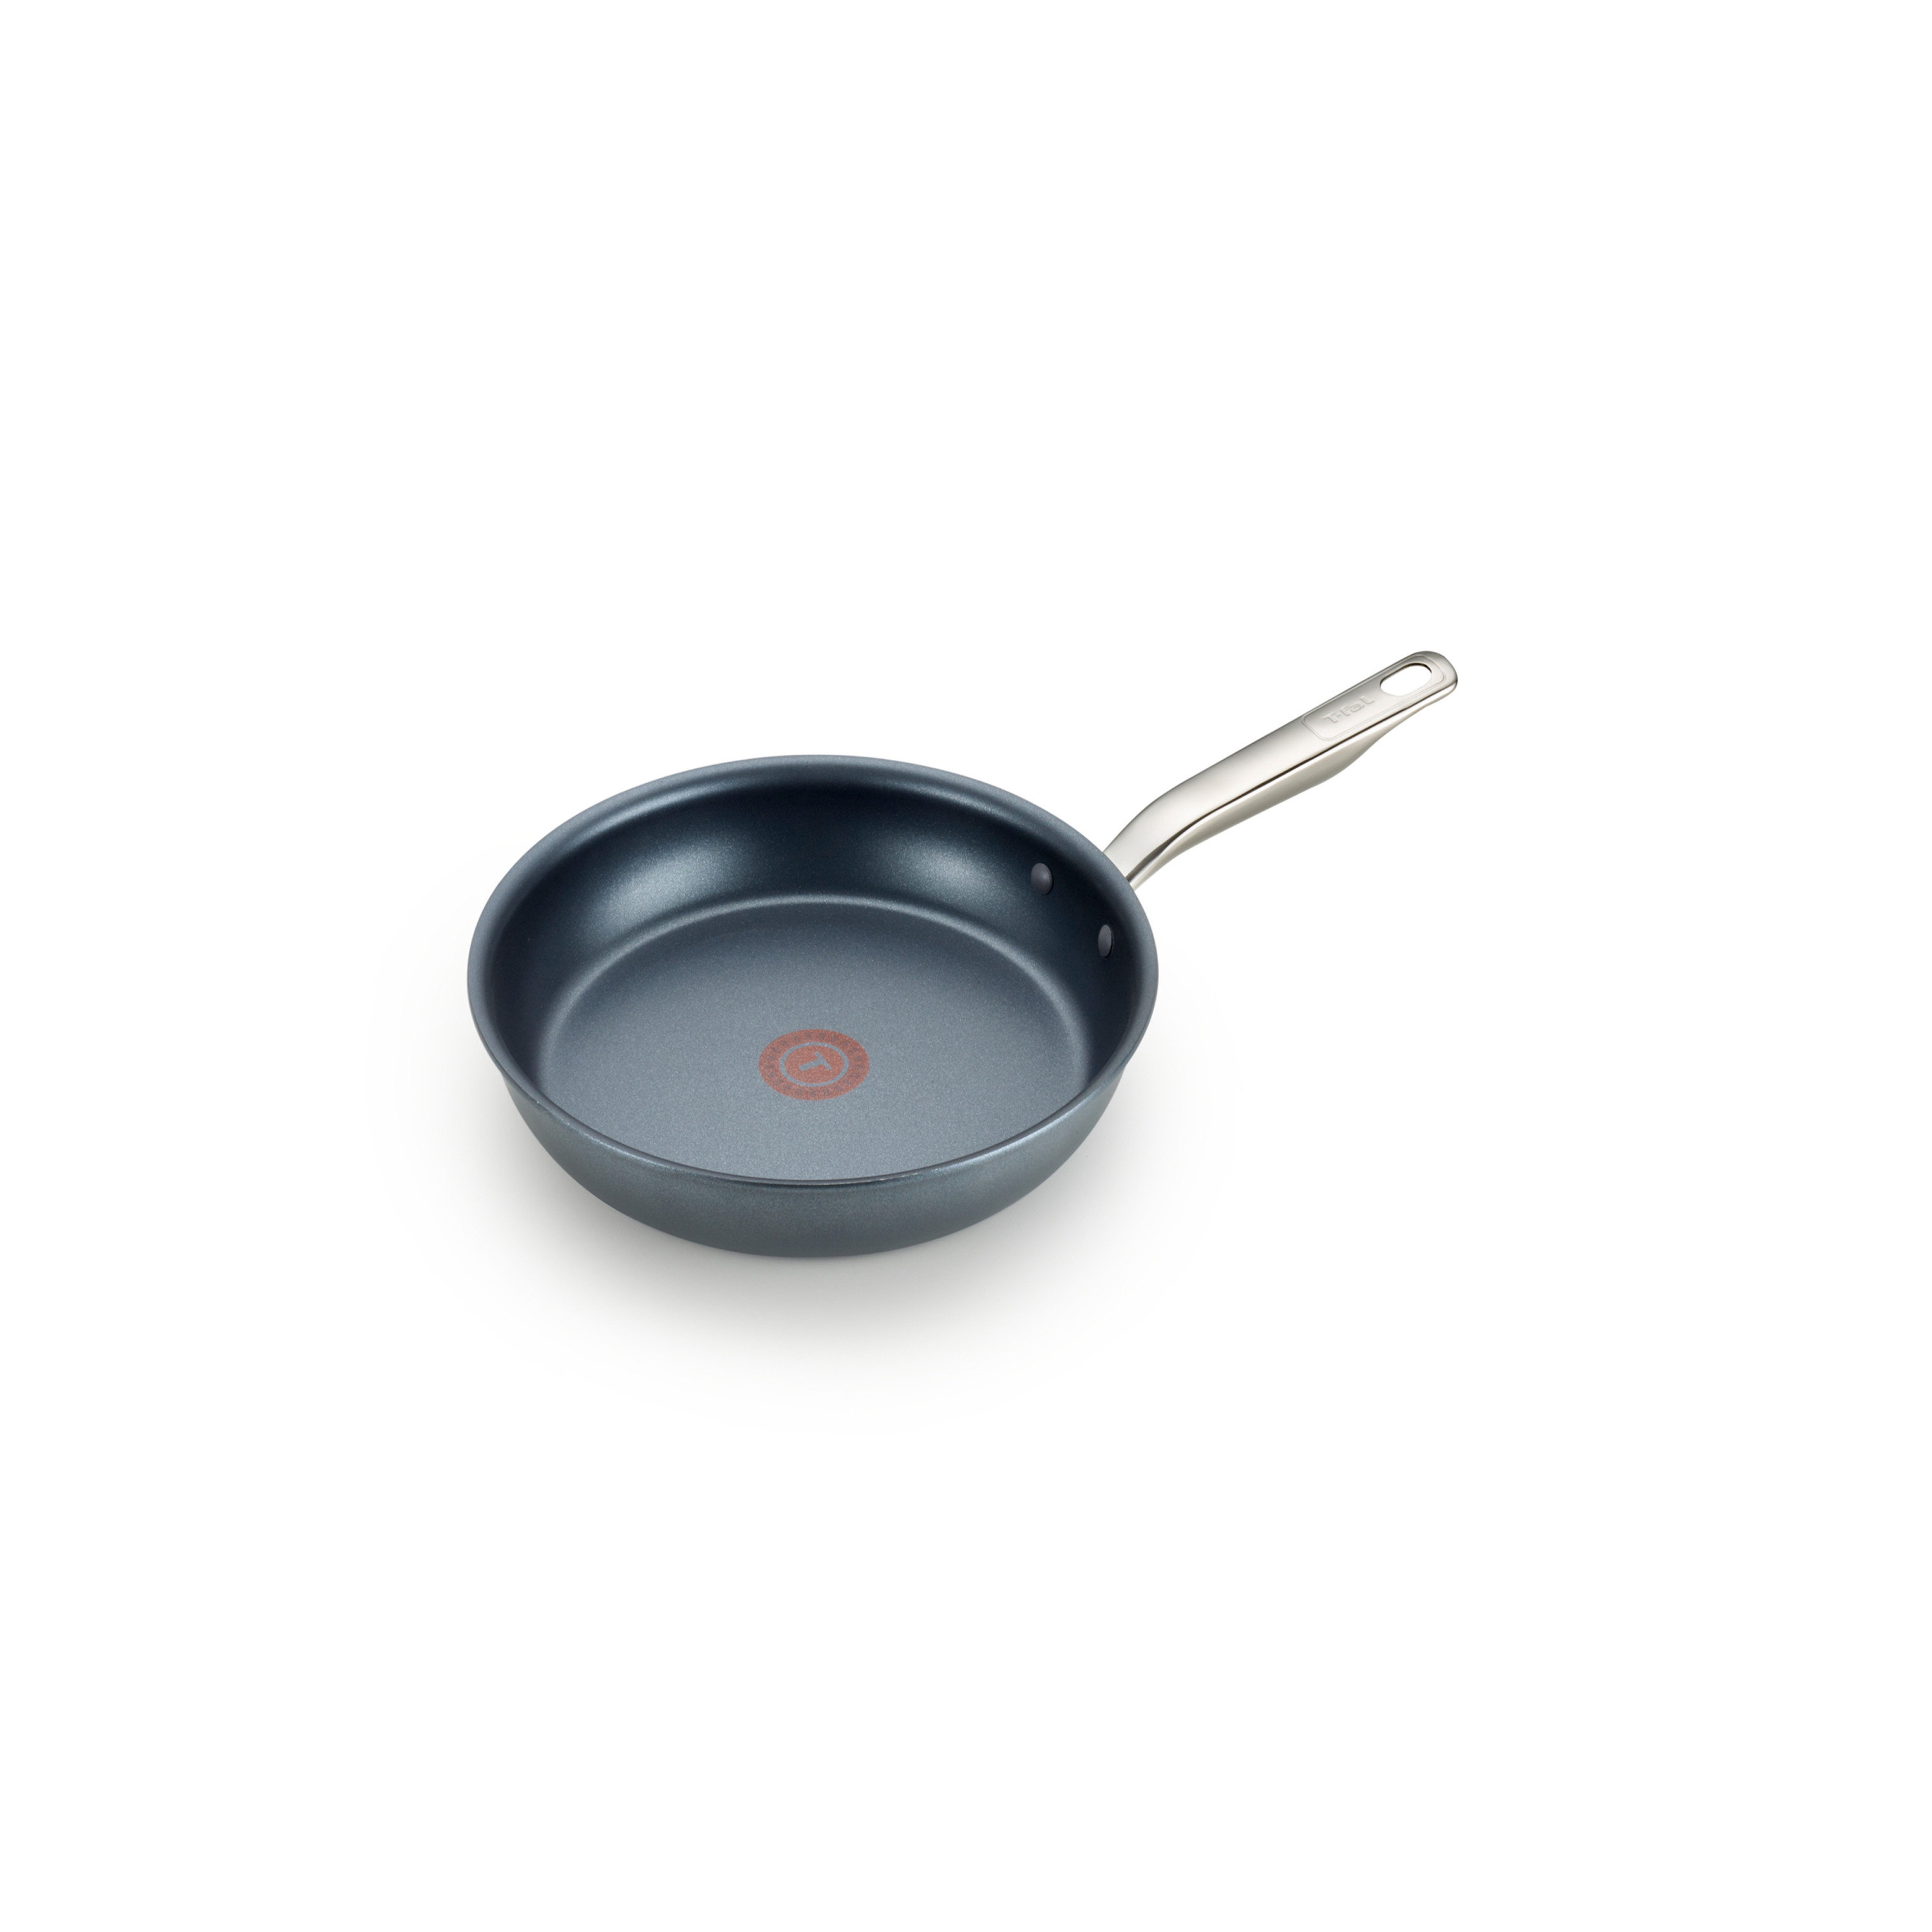 T-fal Dishwasher Safe Fry Pan With Lid Hard Anodized Titanium Nonstick, 12- Inch